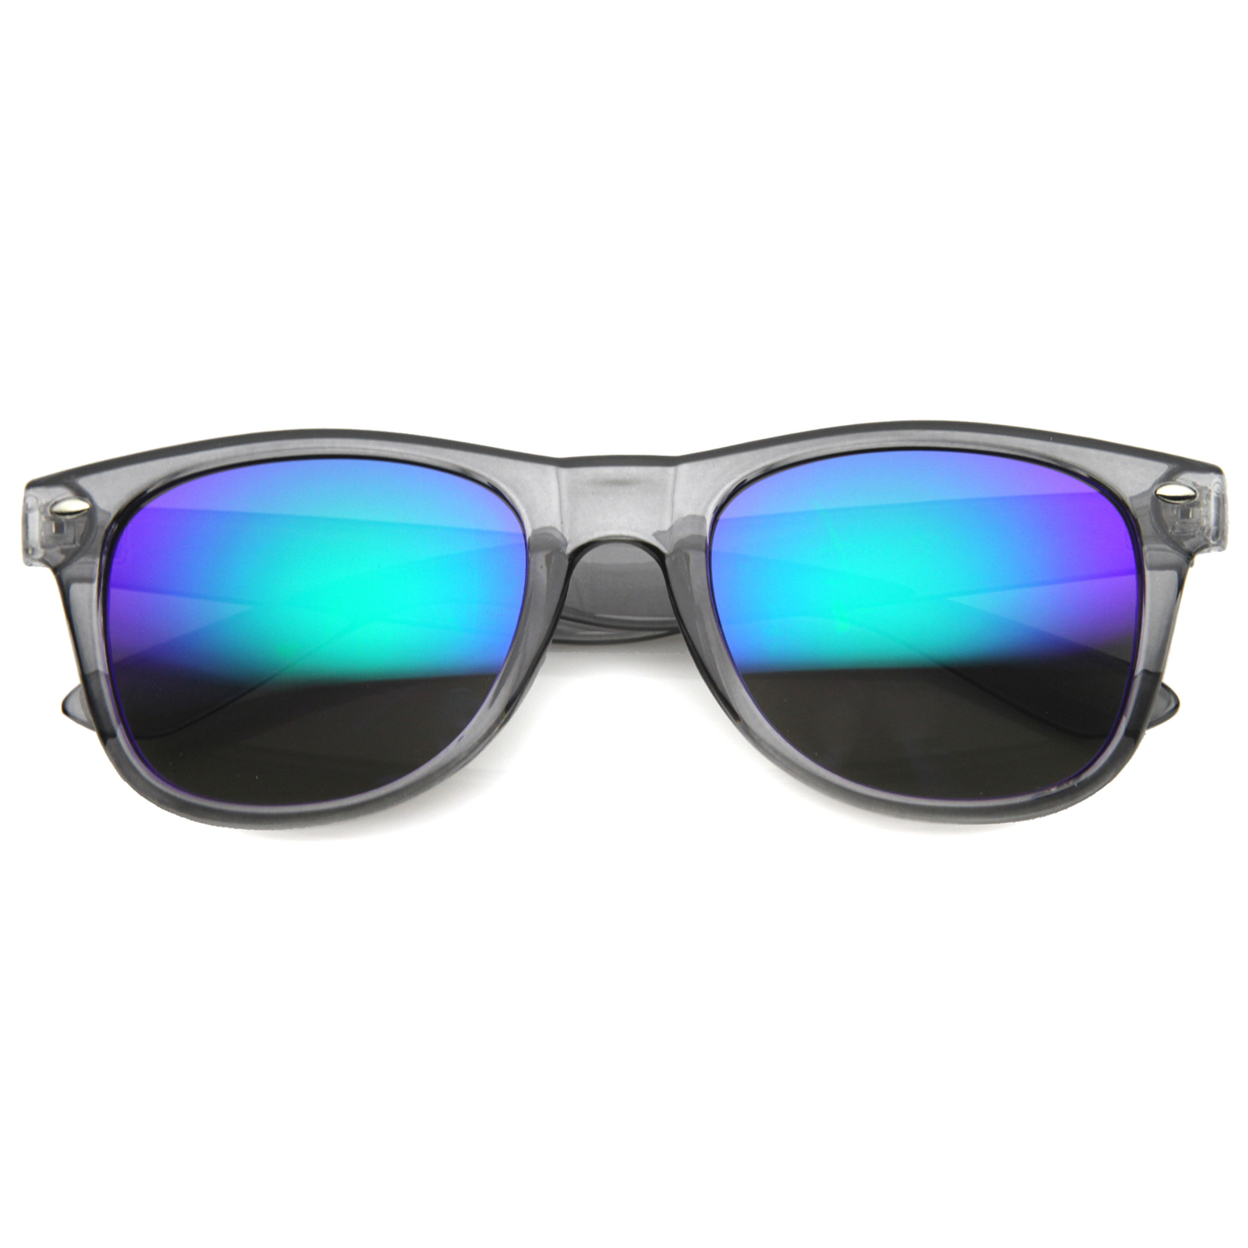 Mens Horn Rimmed Sunglasses With UV400 Protected Mirrored Lens 9947 - Grey / Sun